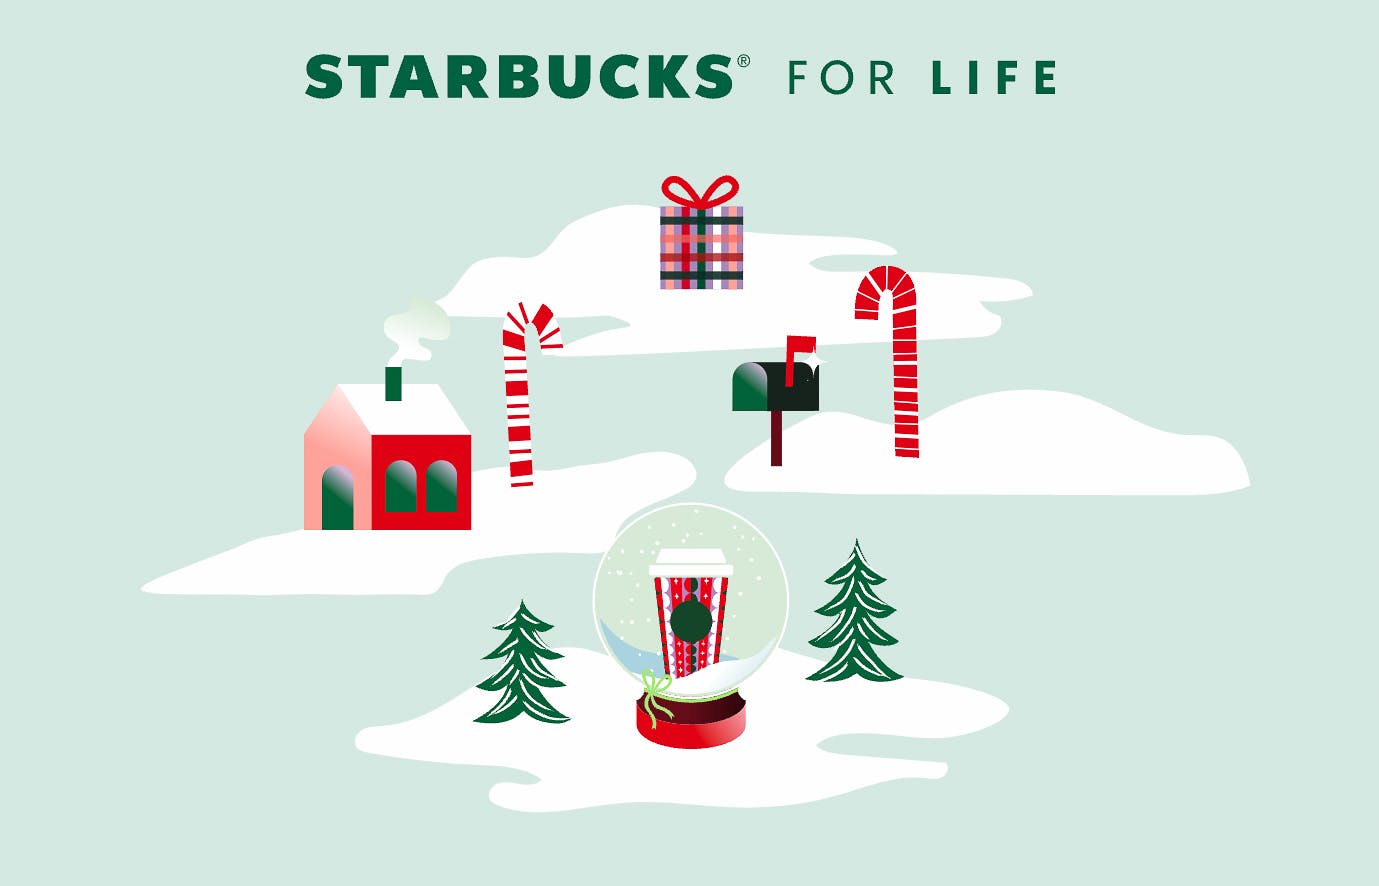 The Starbucks for Life online game graphic for the 2021 holiday season